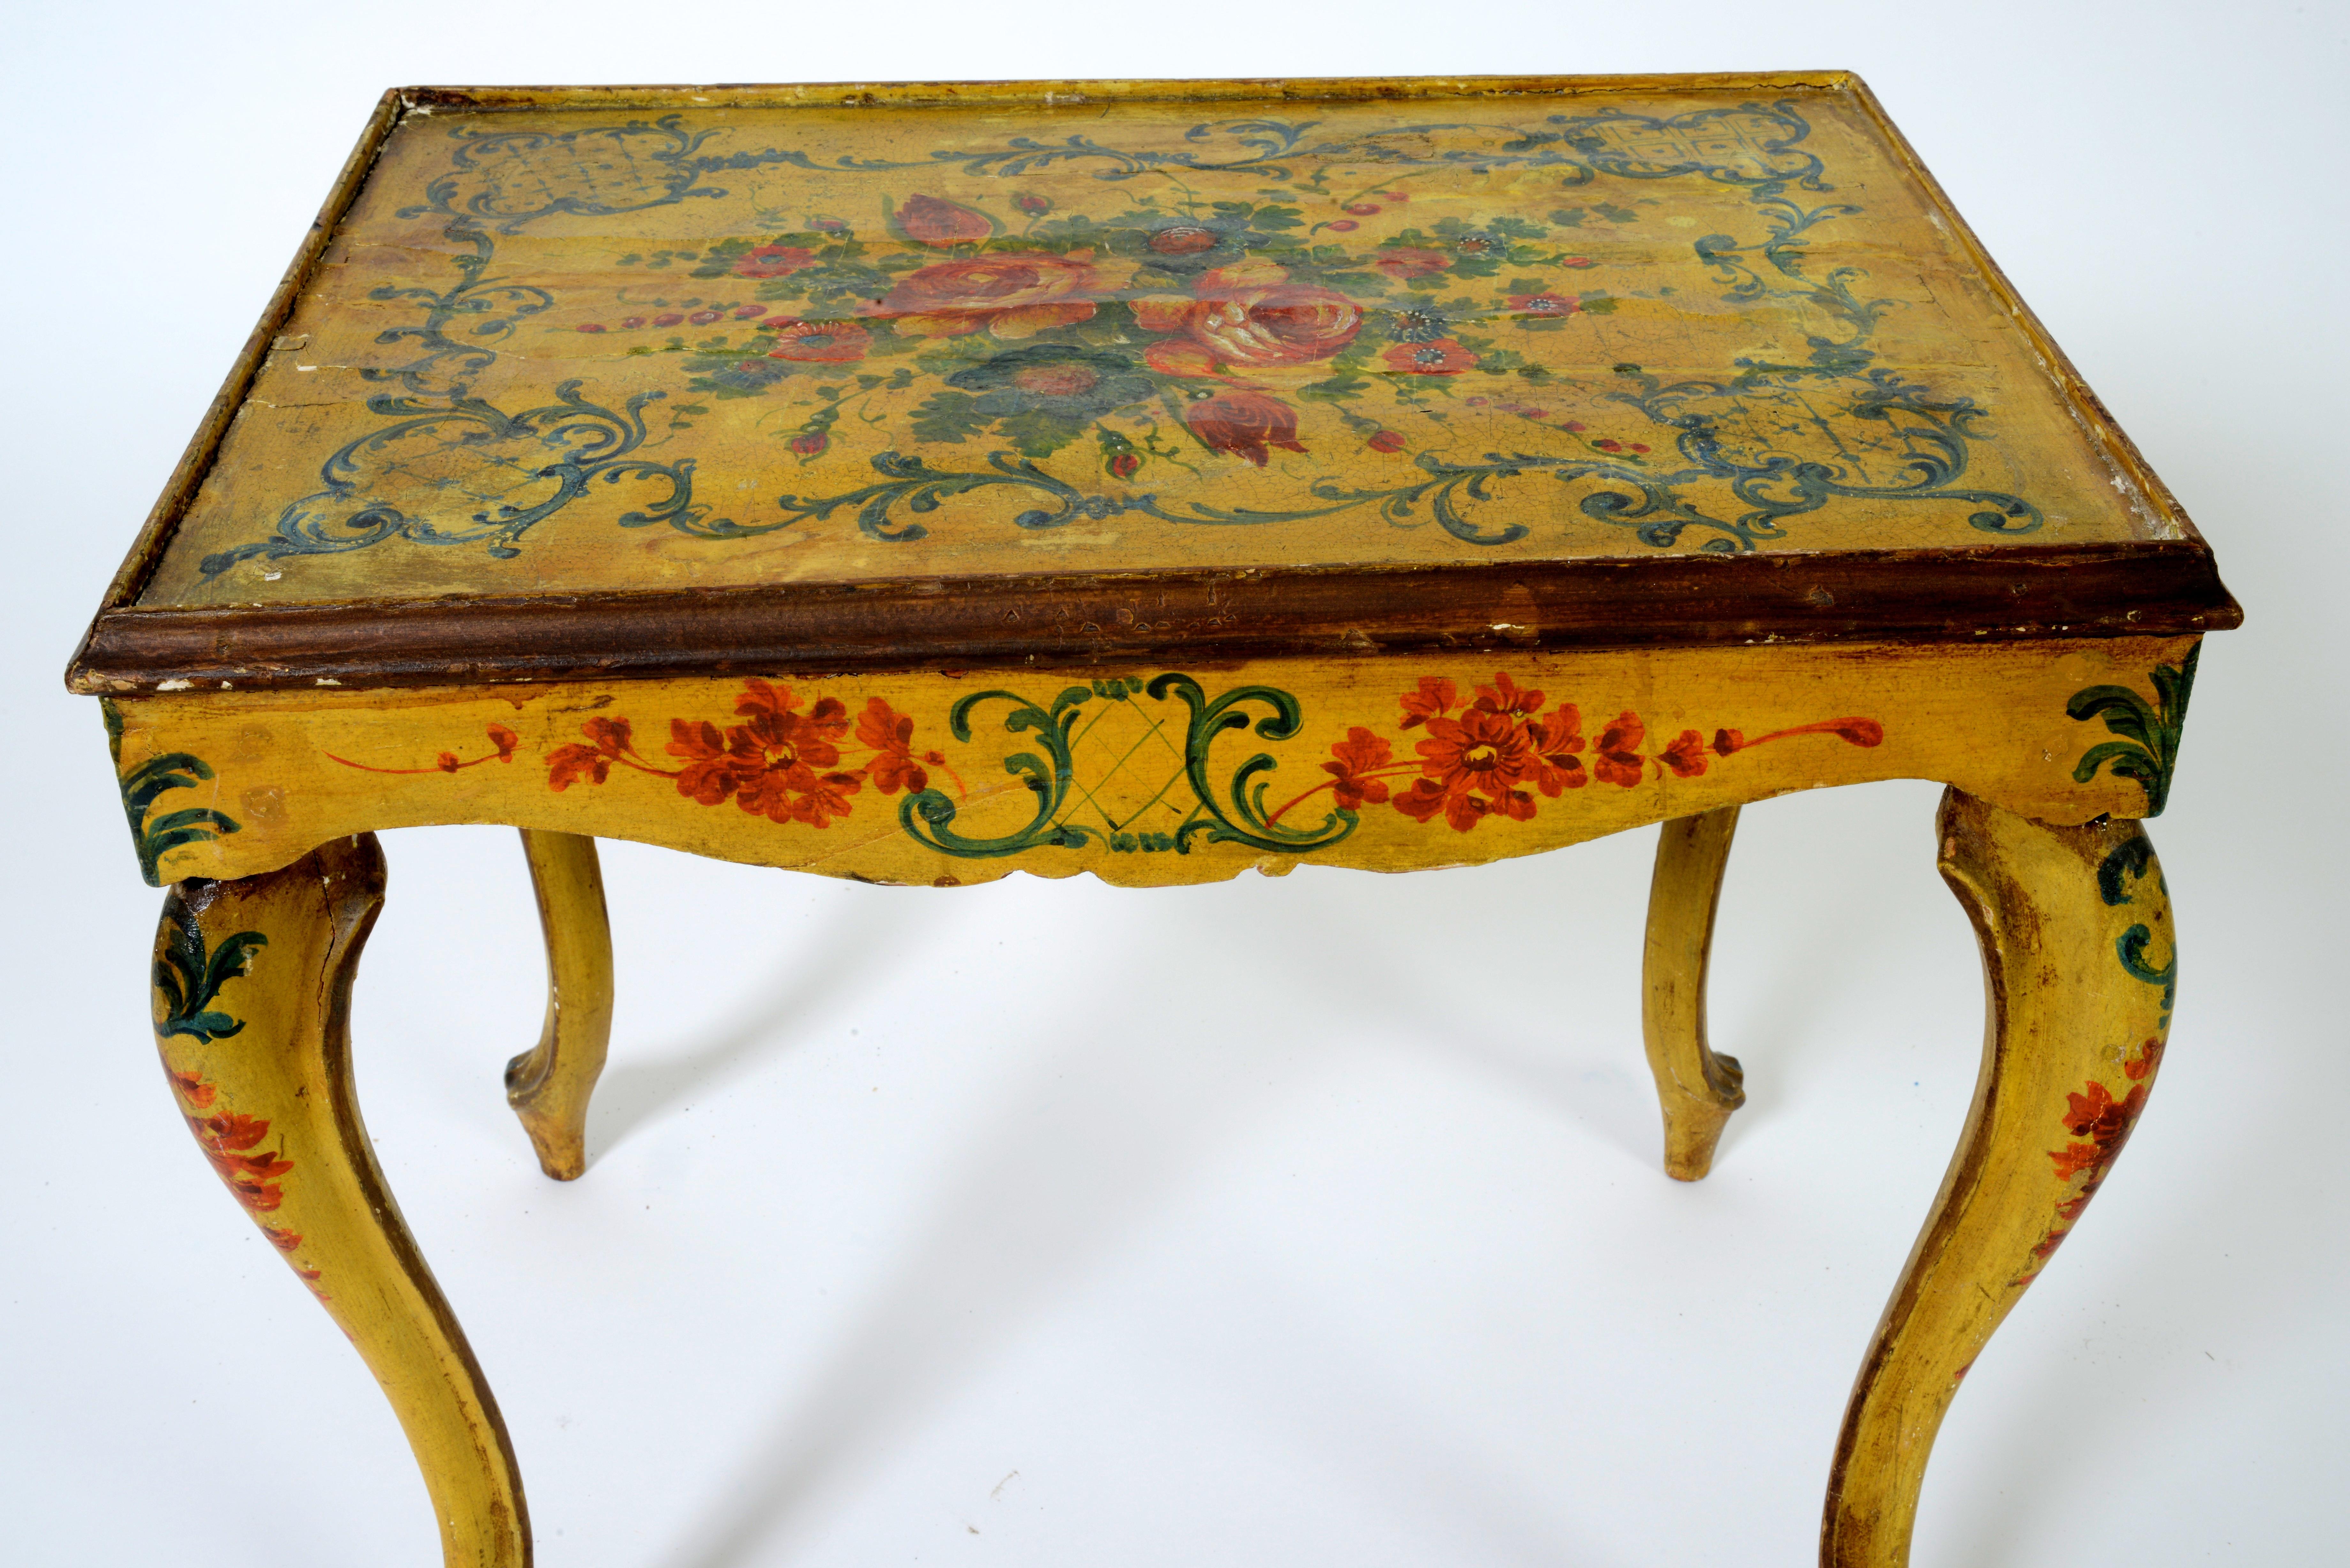 This beautiful hand-painted Venetian table has a yellow ground with green scrolls and red foliate decoration. It has a scalloped apron and stands on cabriole legs. The top has a painted canvas applied over the wood with a glass insert. The